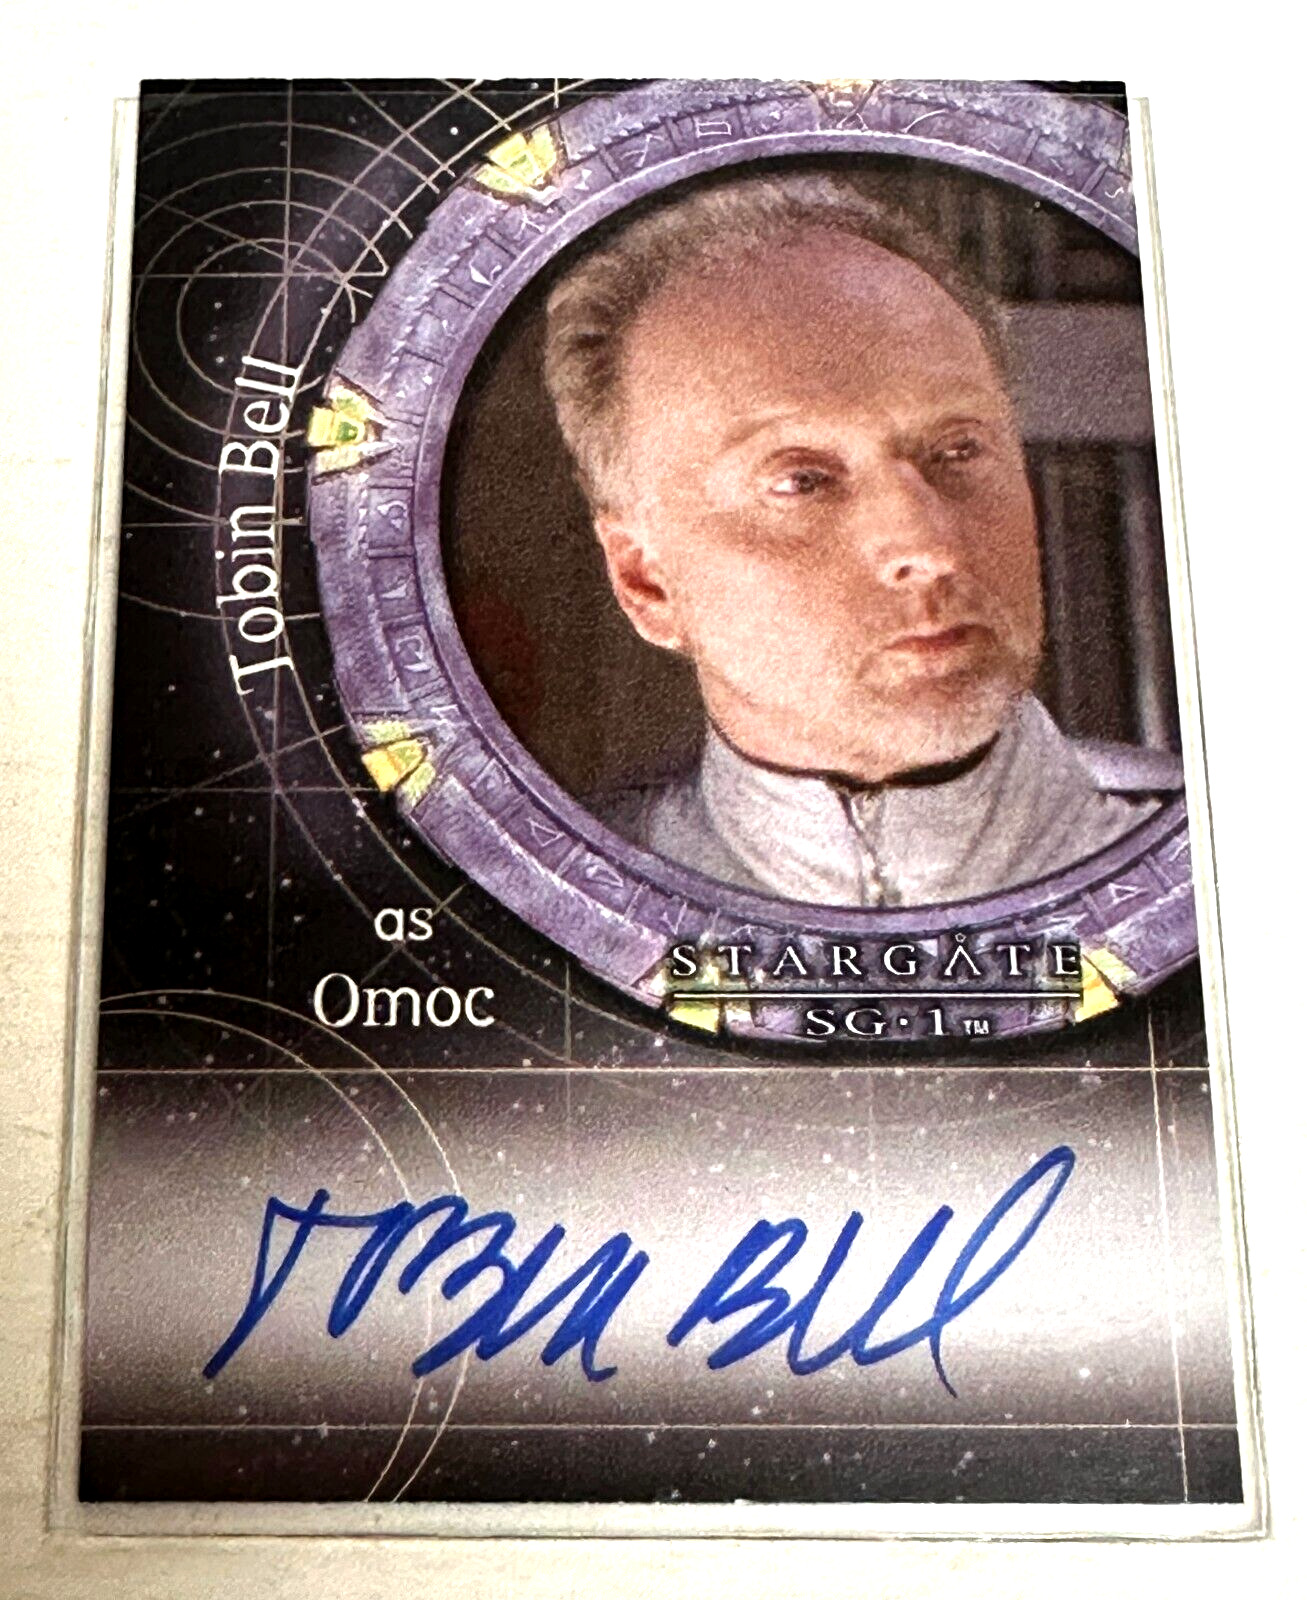 2009 Stargate Heroes Stargate SG-1 Autograph Card Signed by Tobin Bell A115